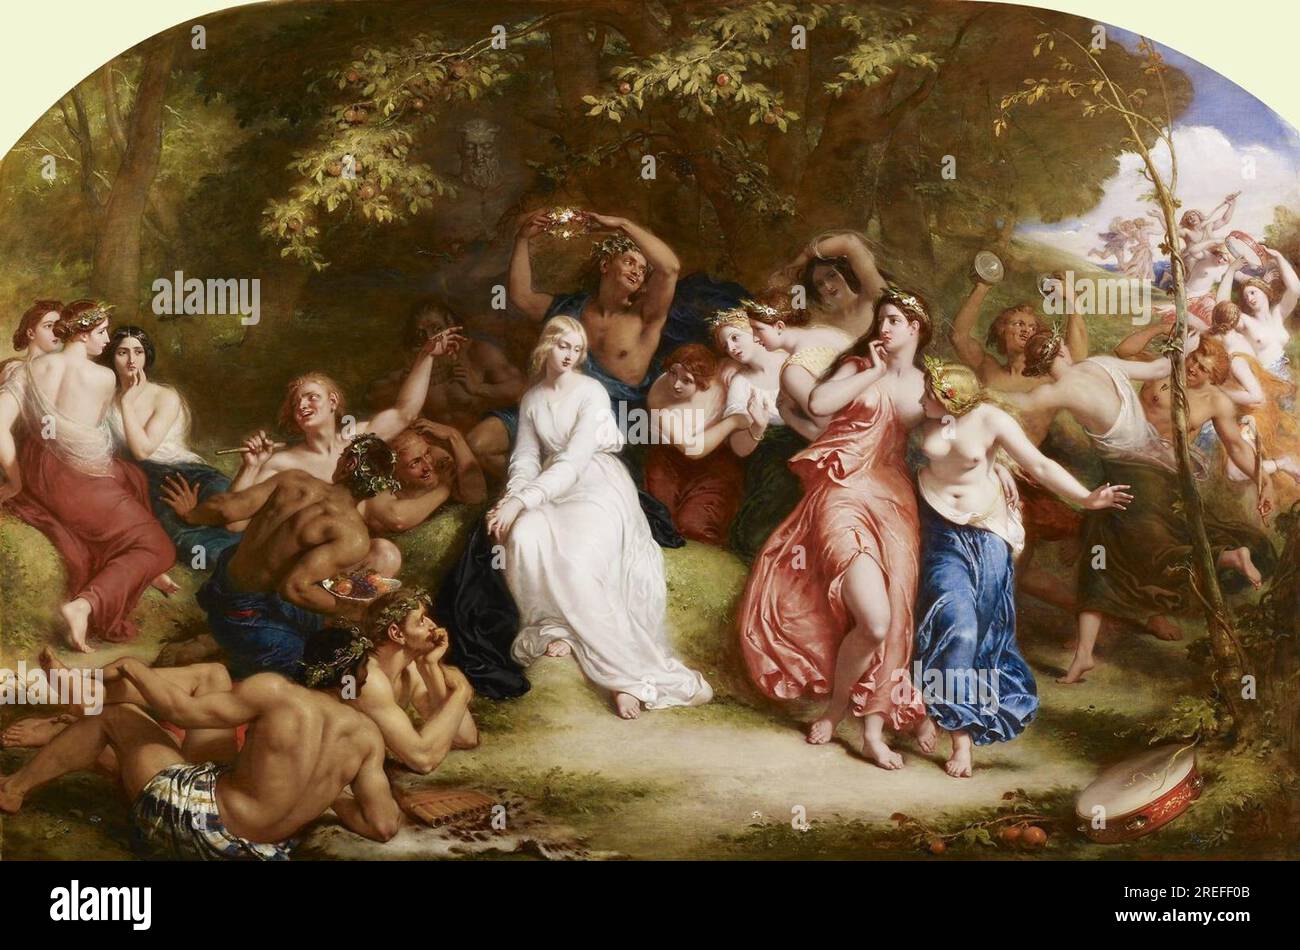 Una among the Fauns and Wood Nymphs 1847 by William Edward Frost Stock Photo